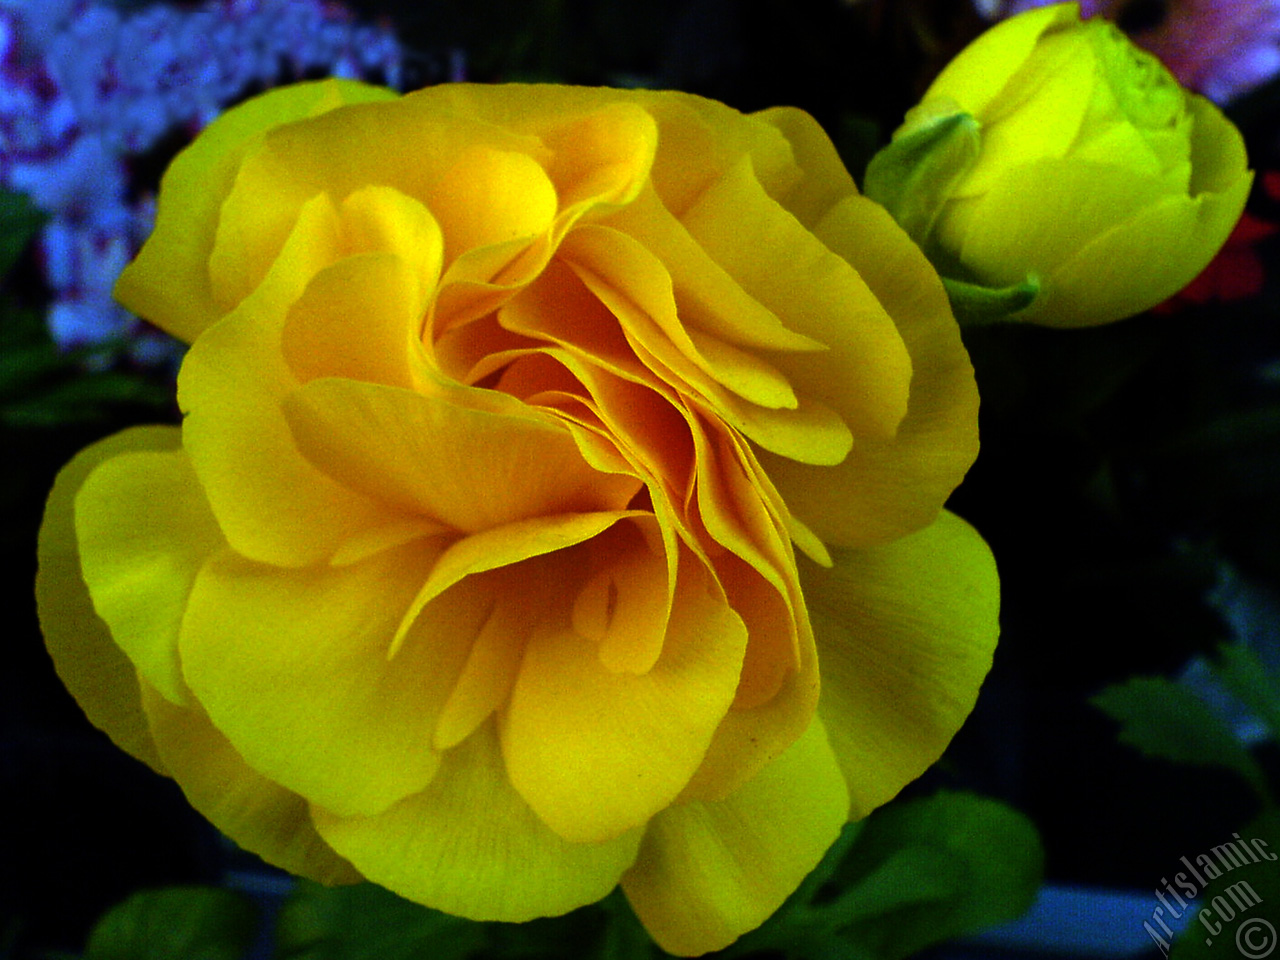 A yellow flower in the pot.
